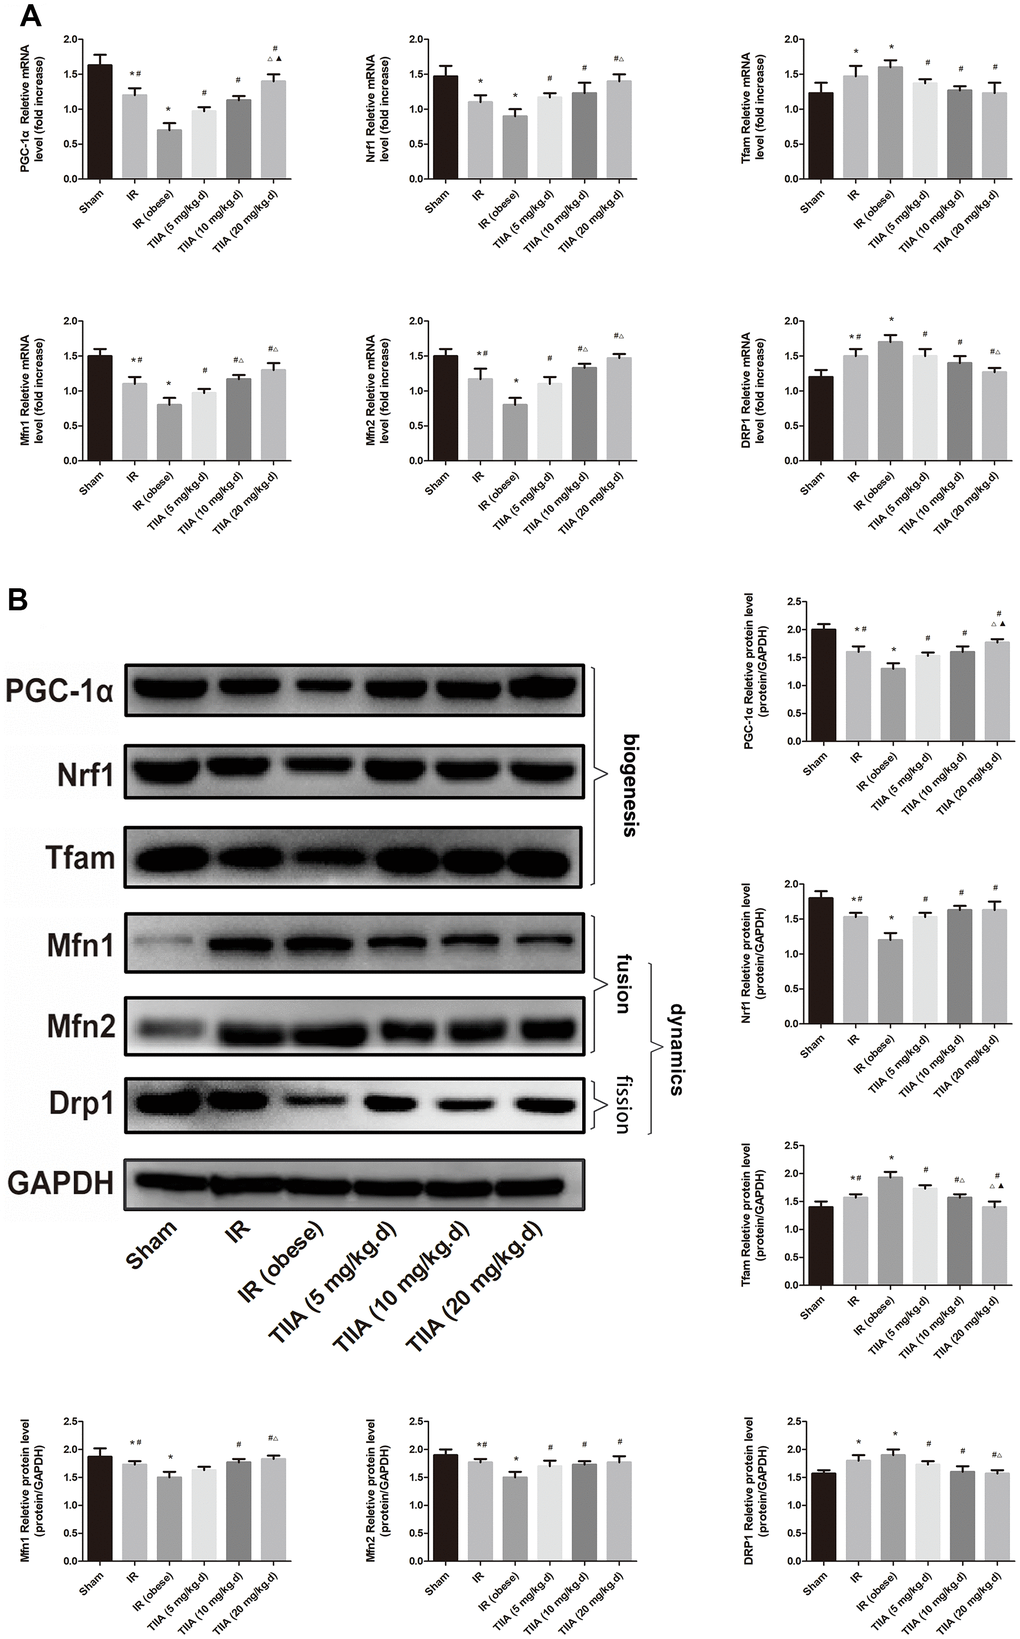 Tanshinone IIA (TIIA) preserved mitochondrial biogenesis and dynamics in renal ischemia-reperfusion (IR)-induced renal injury. The expression of PGC-1α, Nrf1, and Tfam in mRNA and protein level. The expression of Mfn1, Mfn2, and Drp1 in mRNA (A) and protein (B) levels. *p #p ∆p F070p 